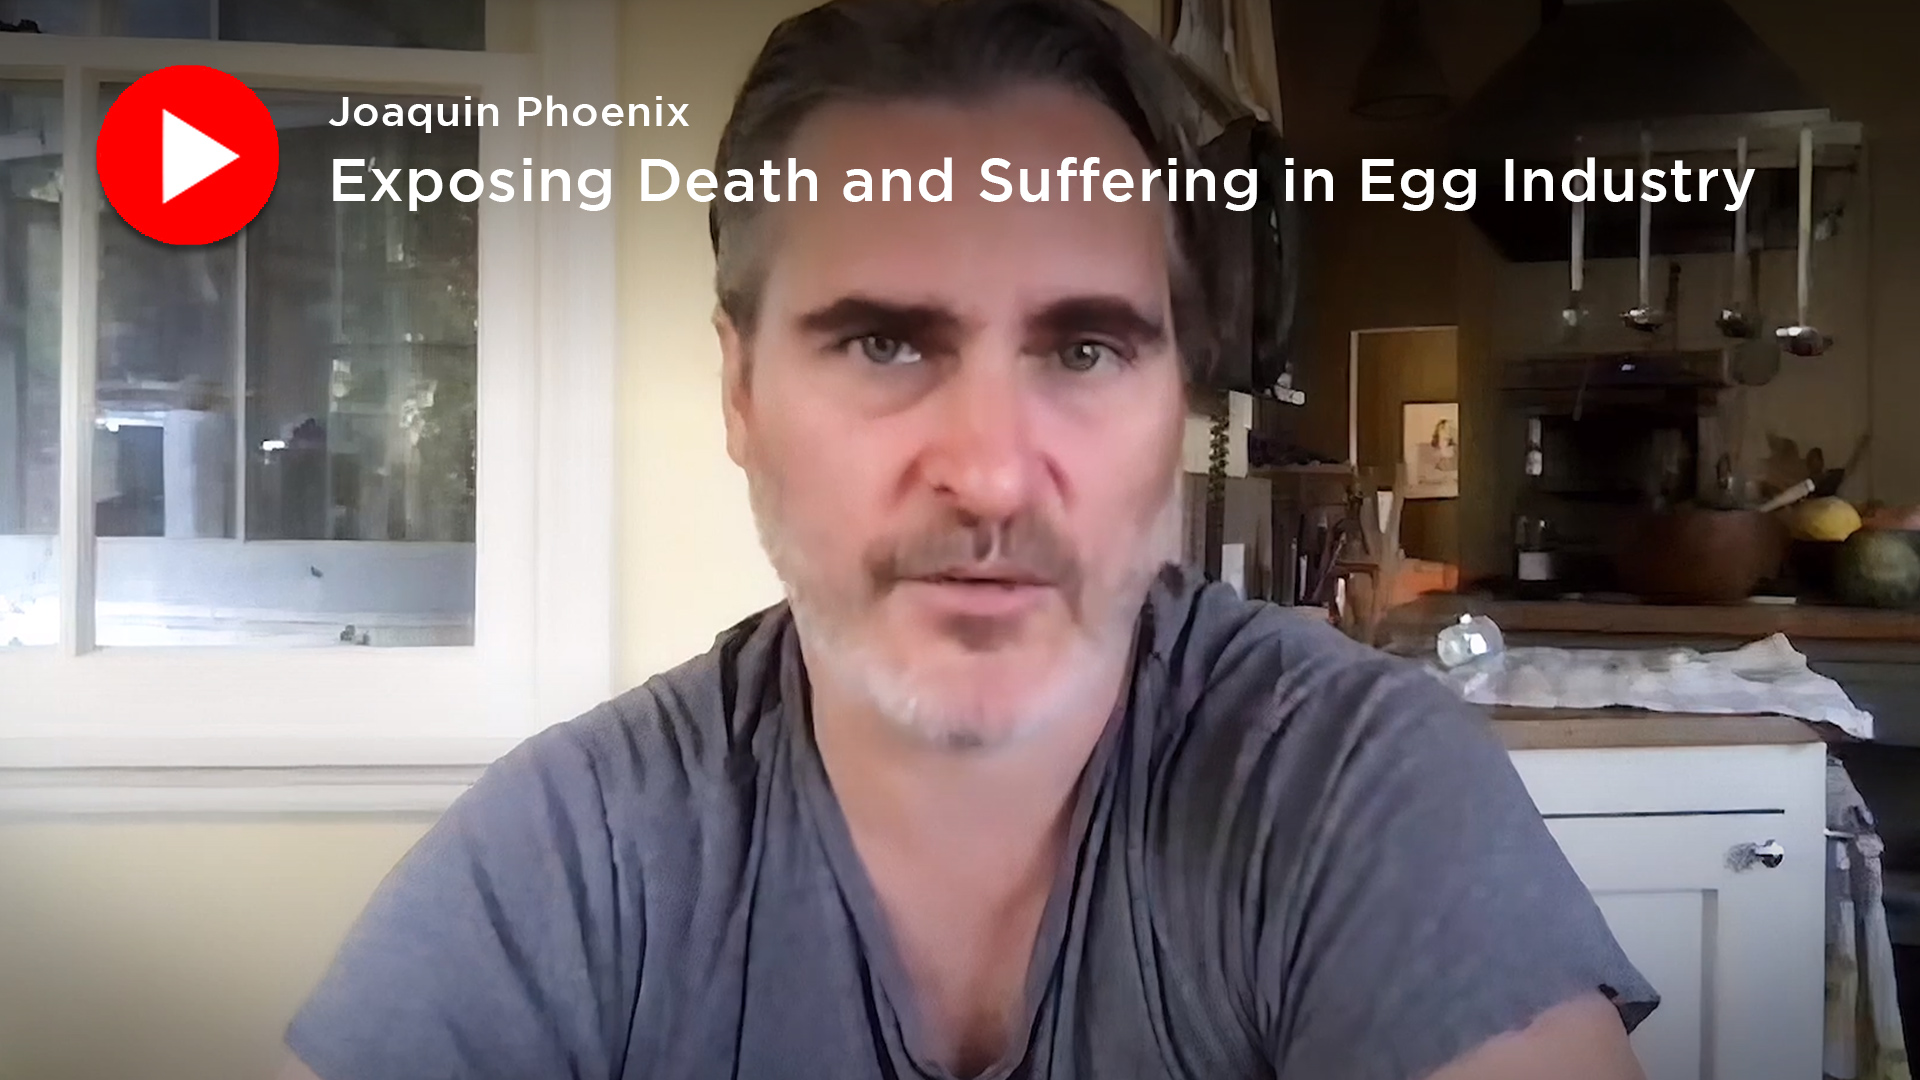 Joaquin Phoenix: Exposing death and suffering in the egg industry